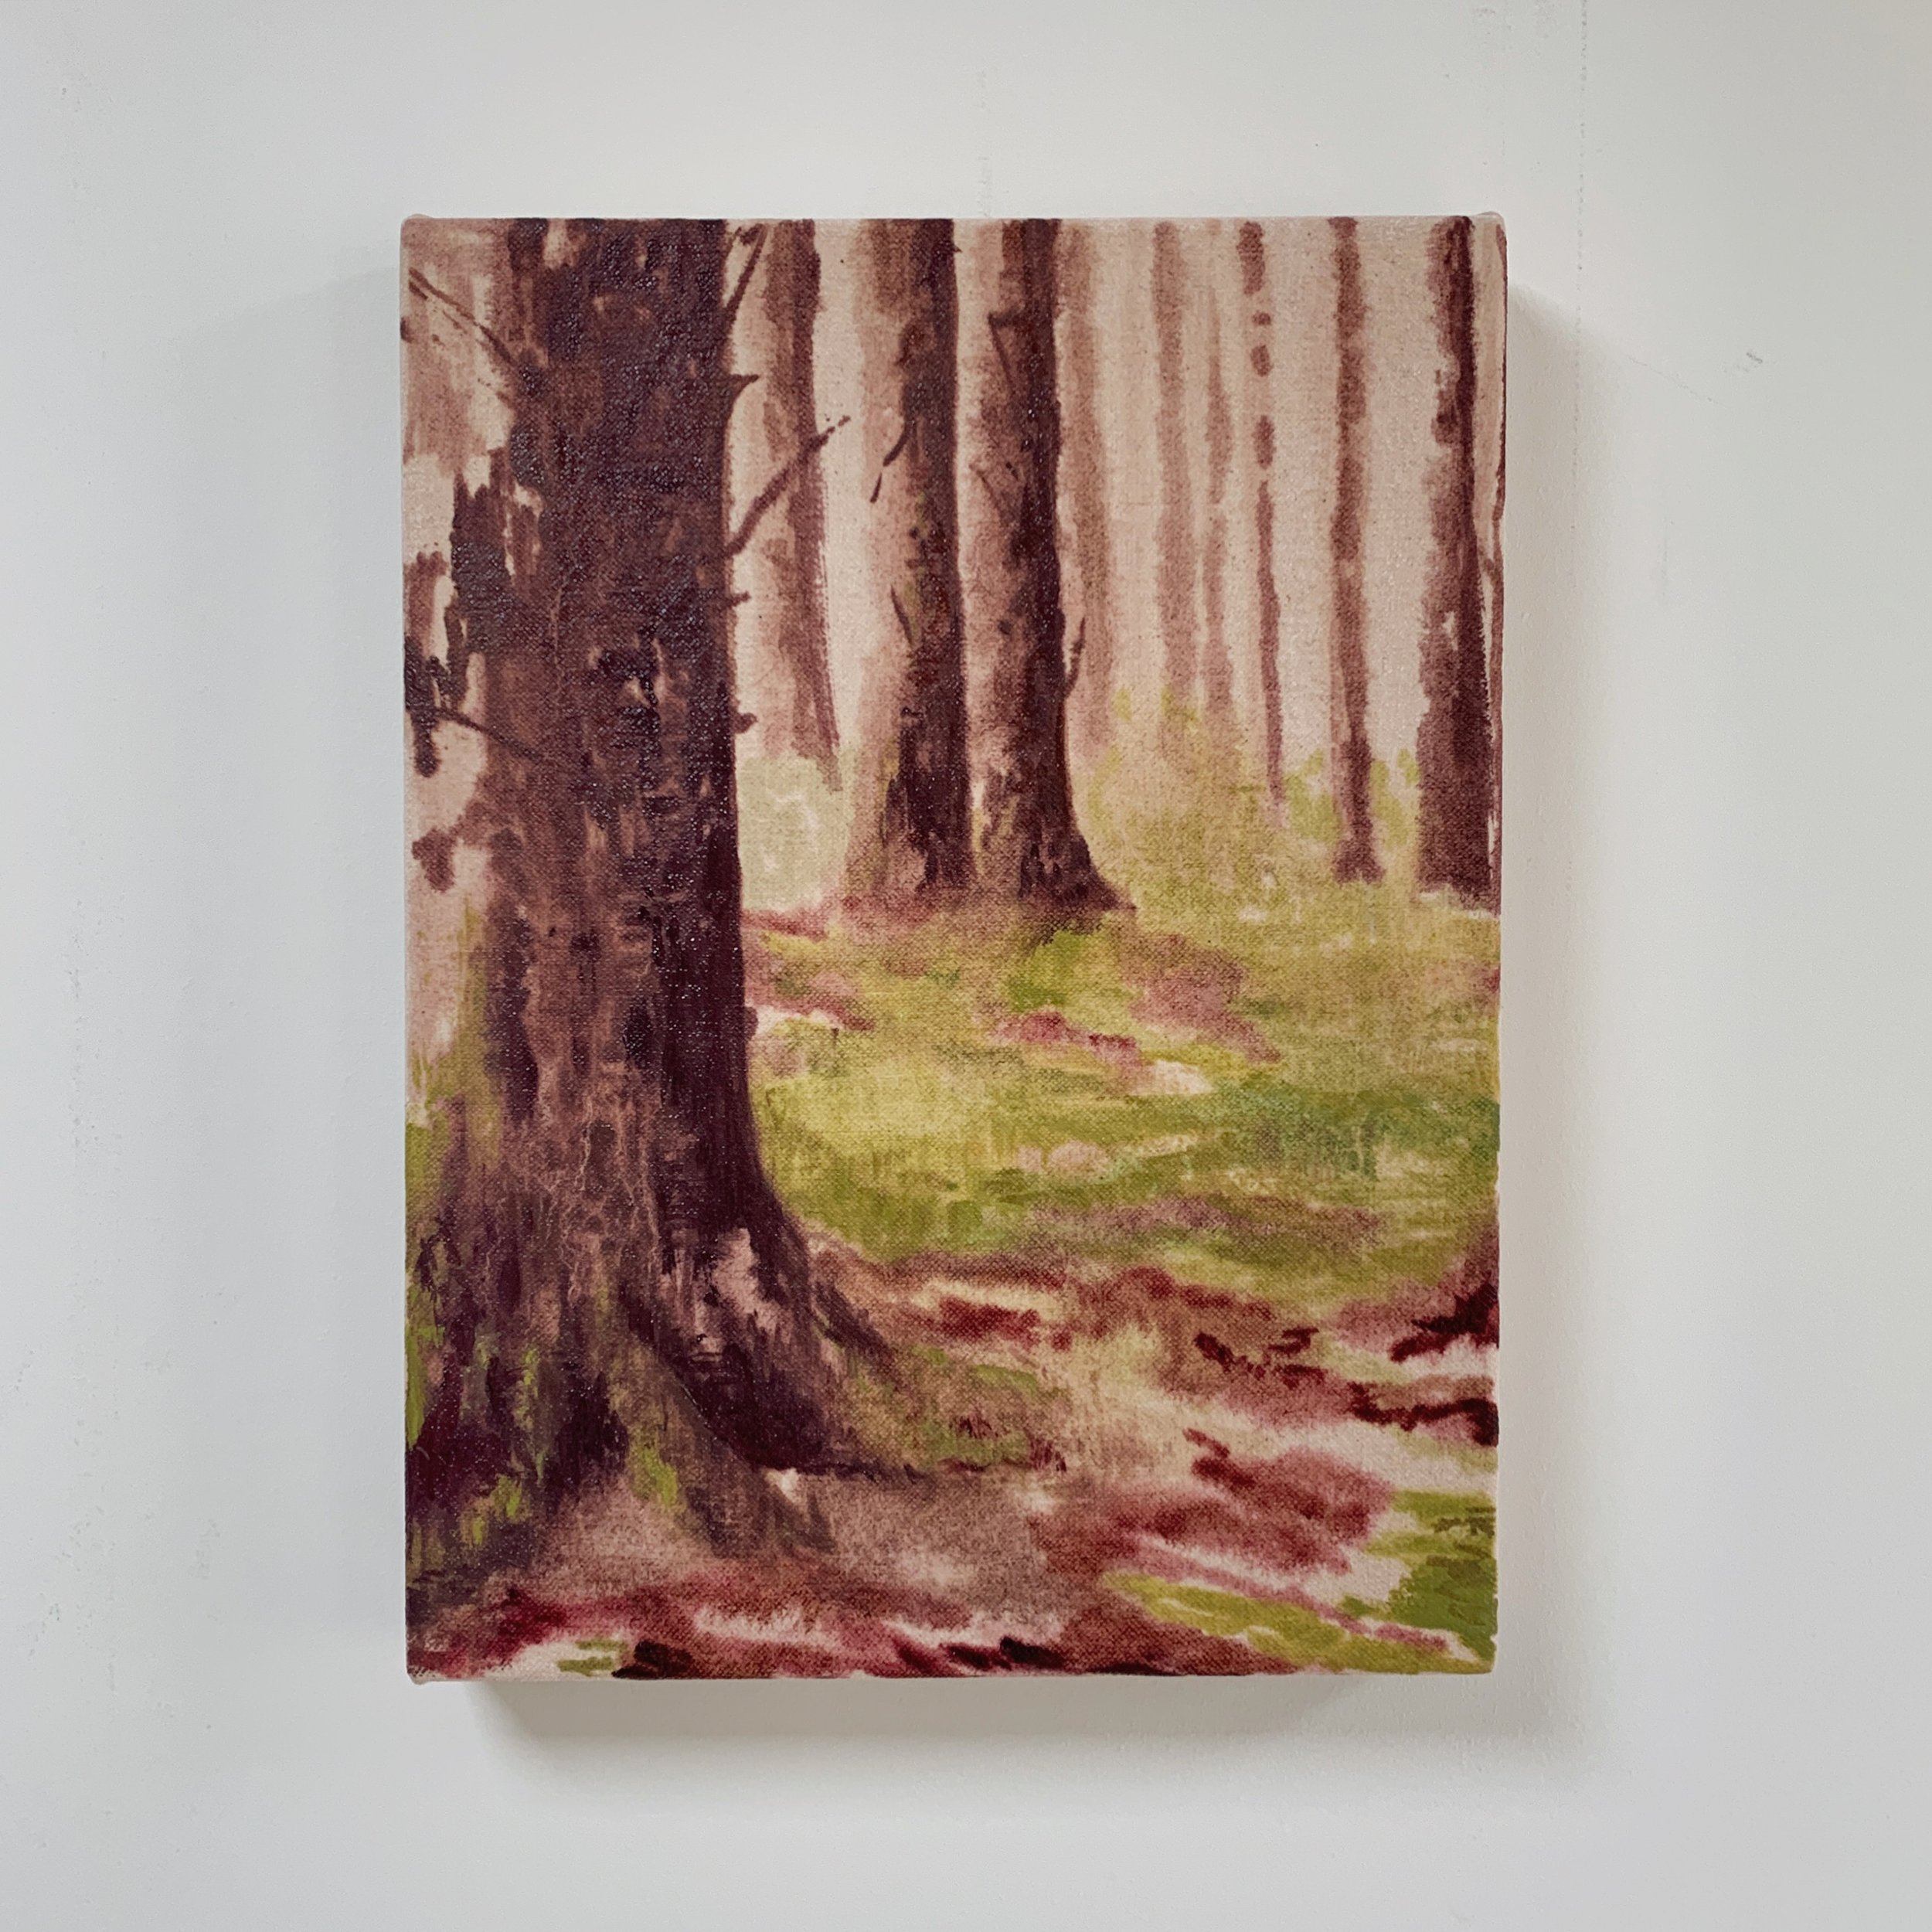 Study of a vibrant, living forest in Brecon
Oil on beetroot dyed linen
30x40cm 

Available - dm for more info